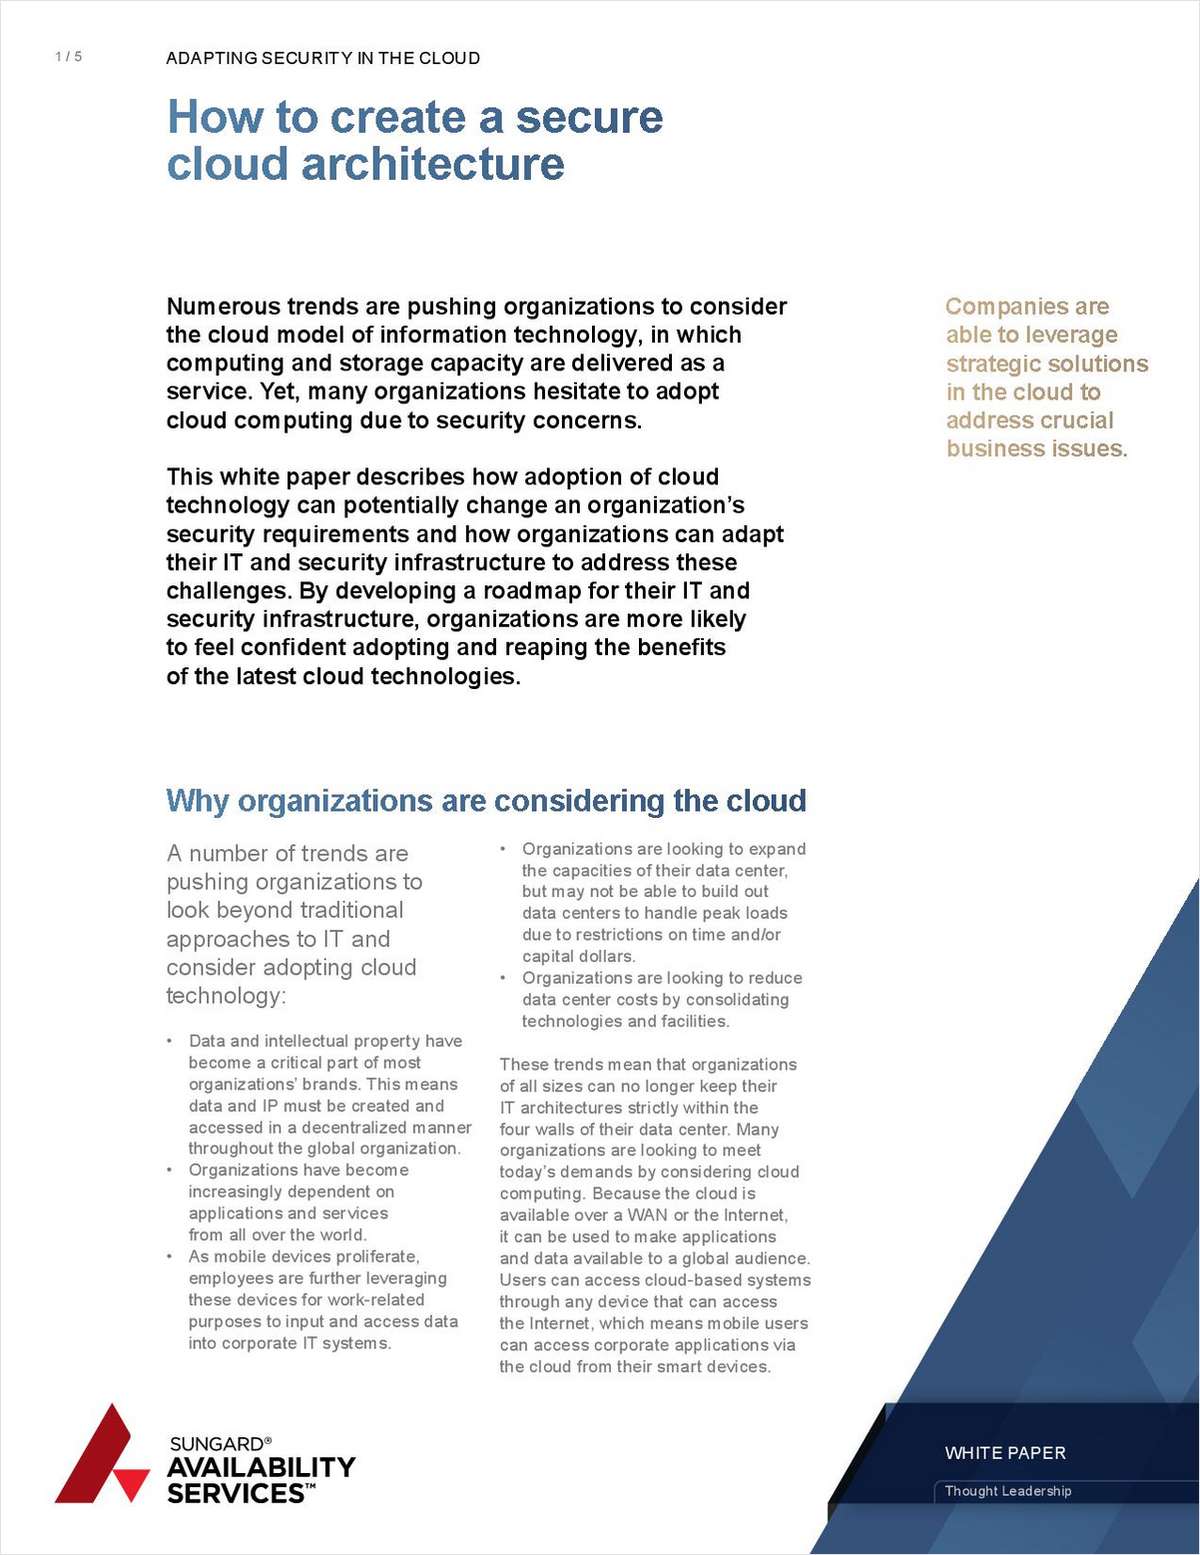 Adapting Security to the Cloud